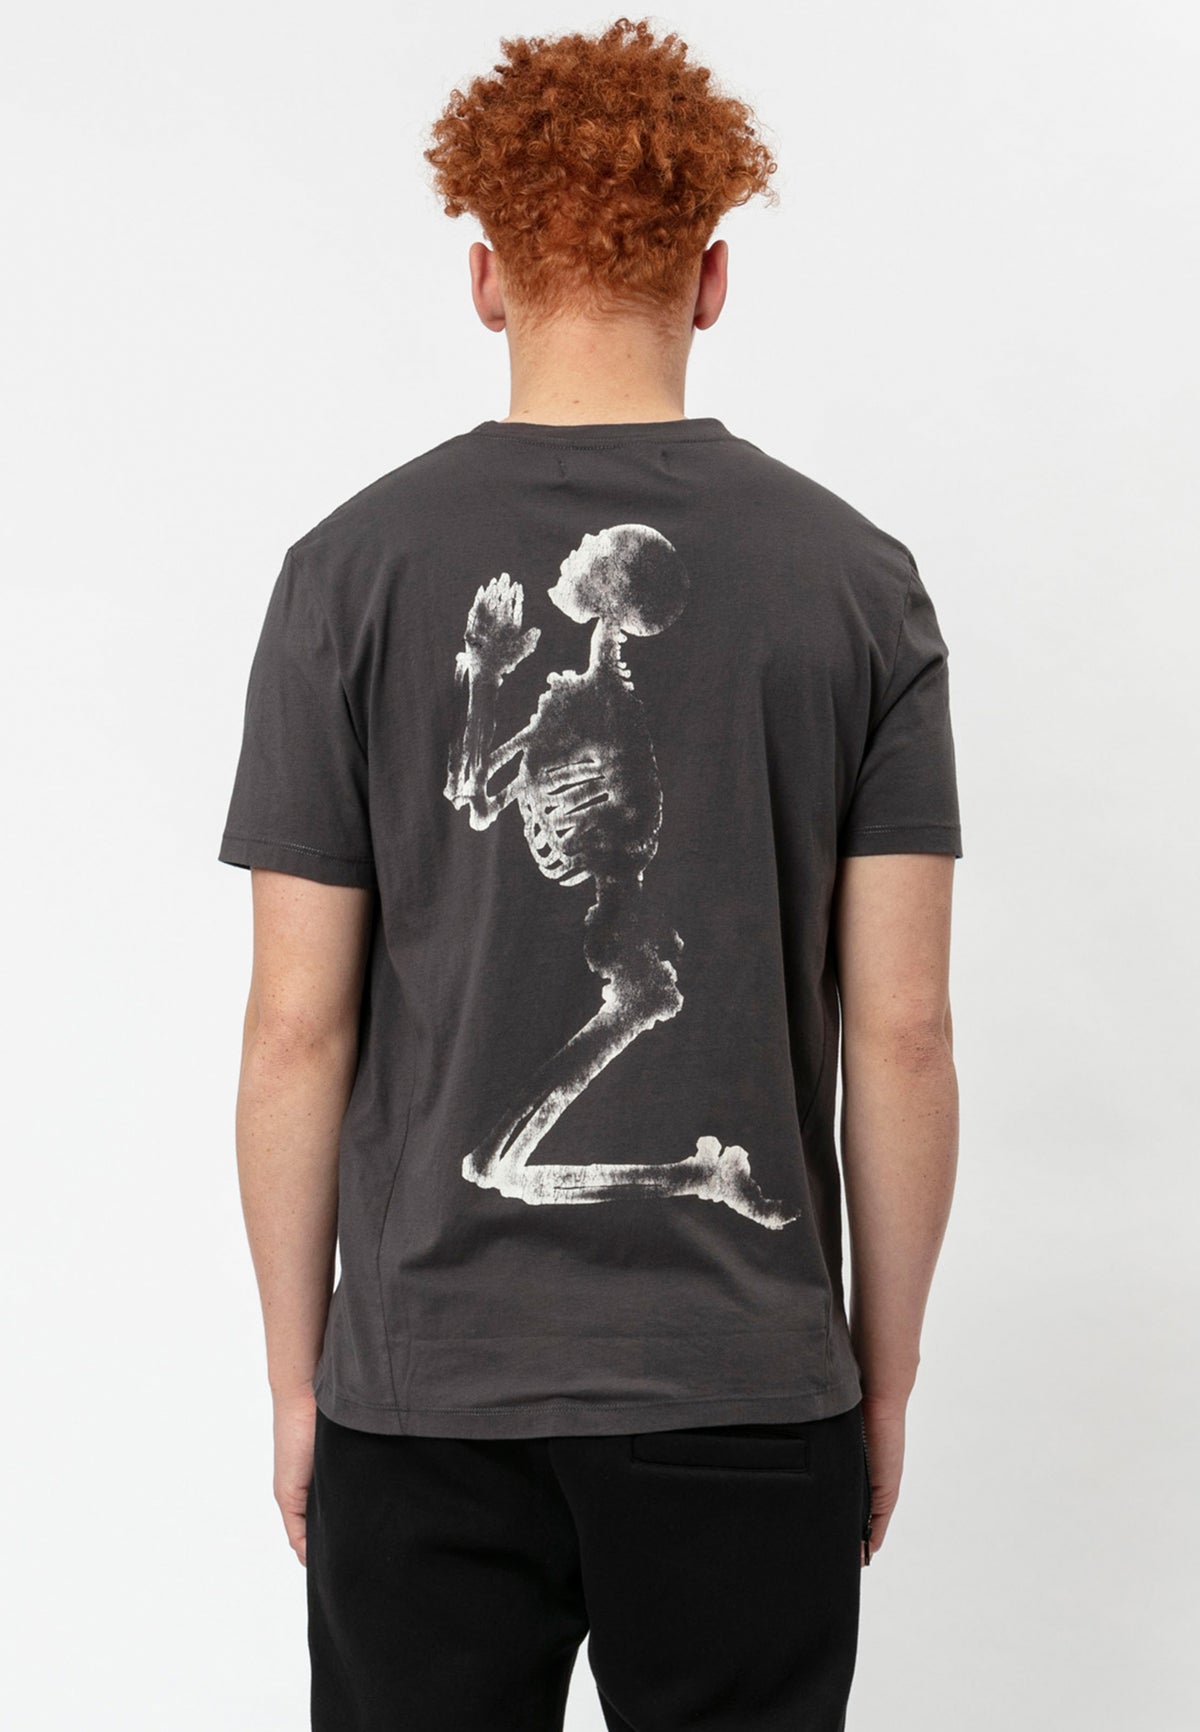 WASHED OUT T-SHIRT DARK METAL